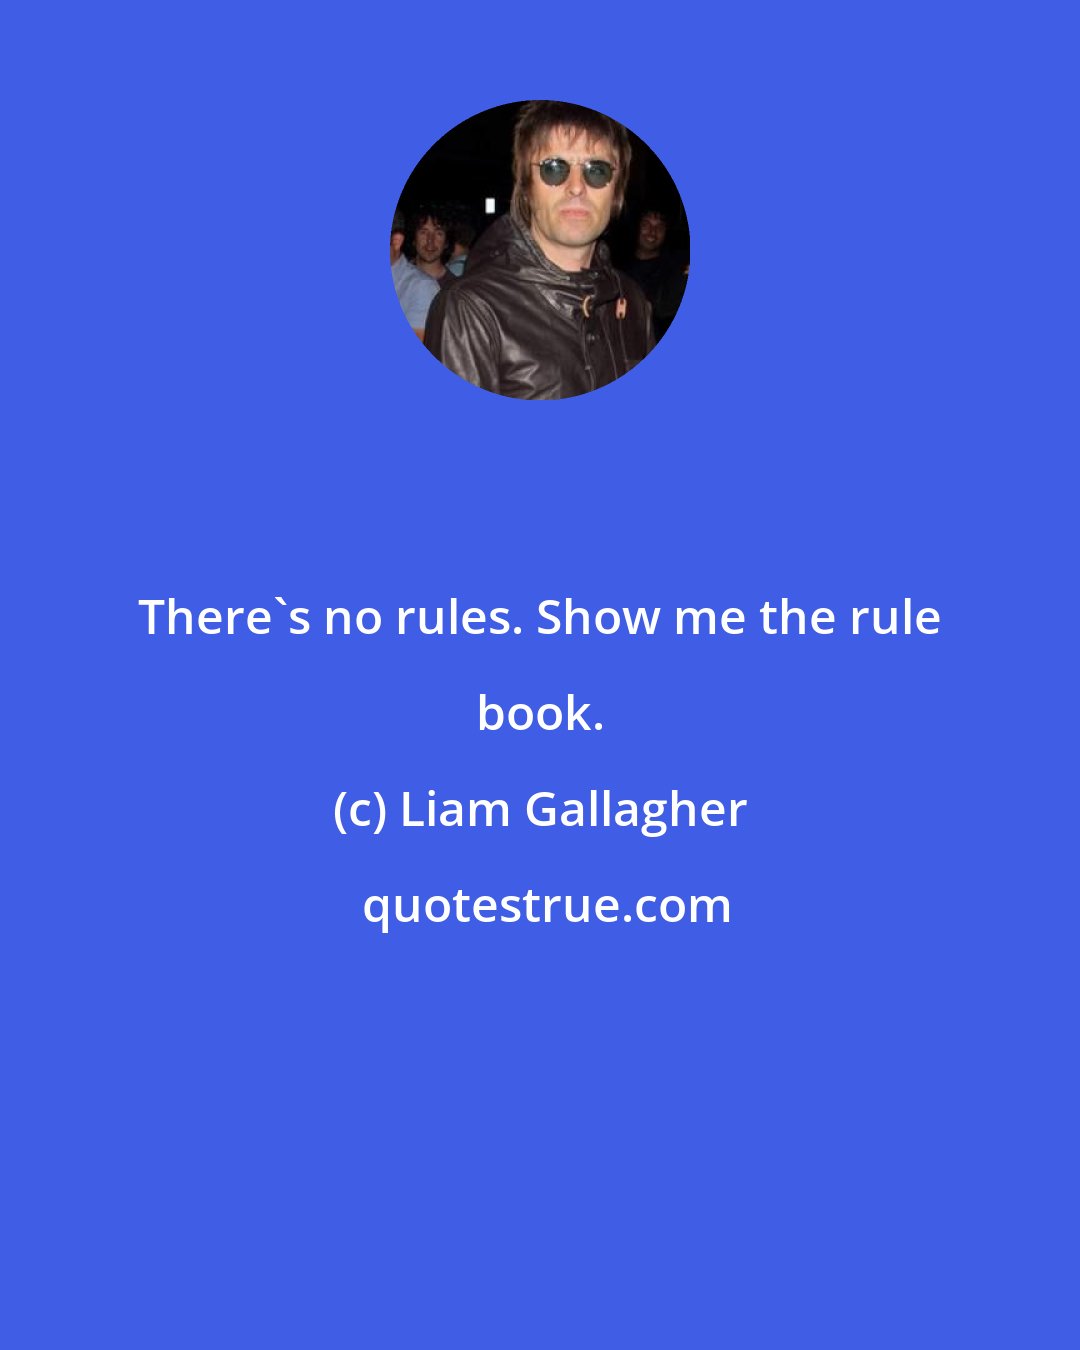 Liam Gallagher: There's no rules. Show me the rule book.